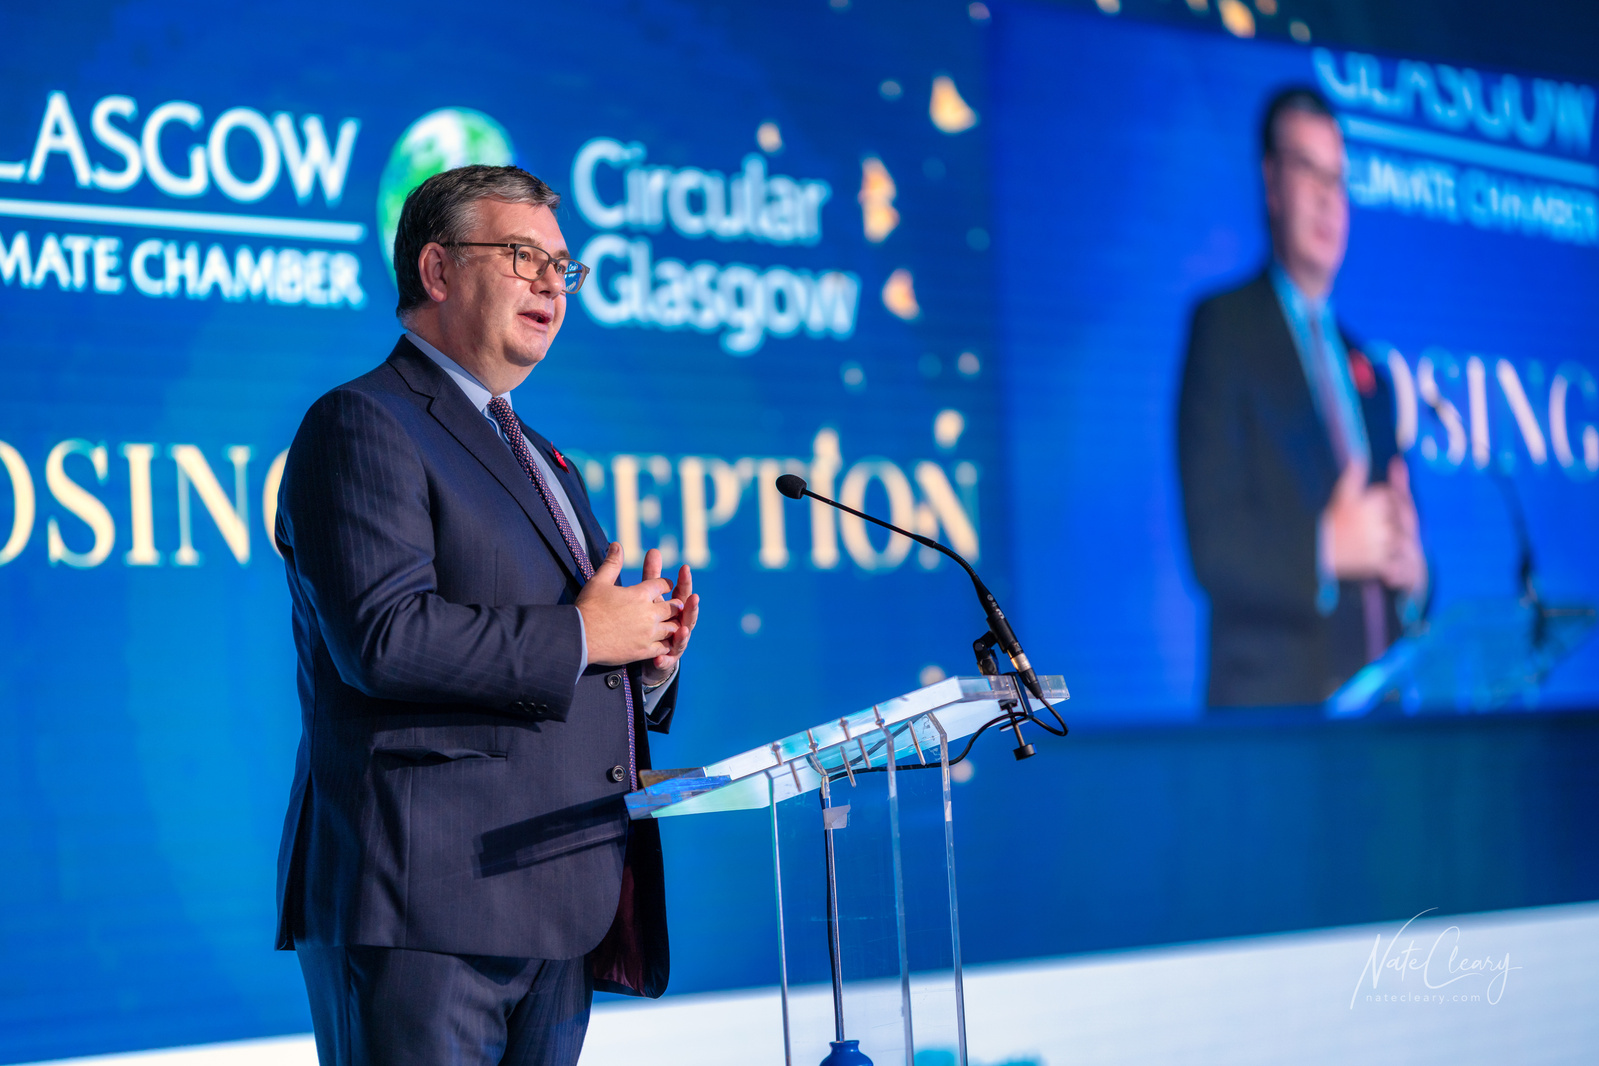 Speaker presents at Glasgow Chamber of Commerce event in Scotland- Photography by Nate Cleary